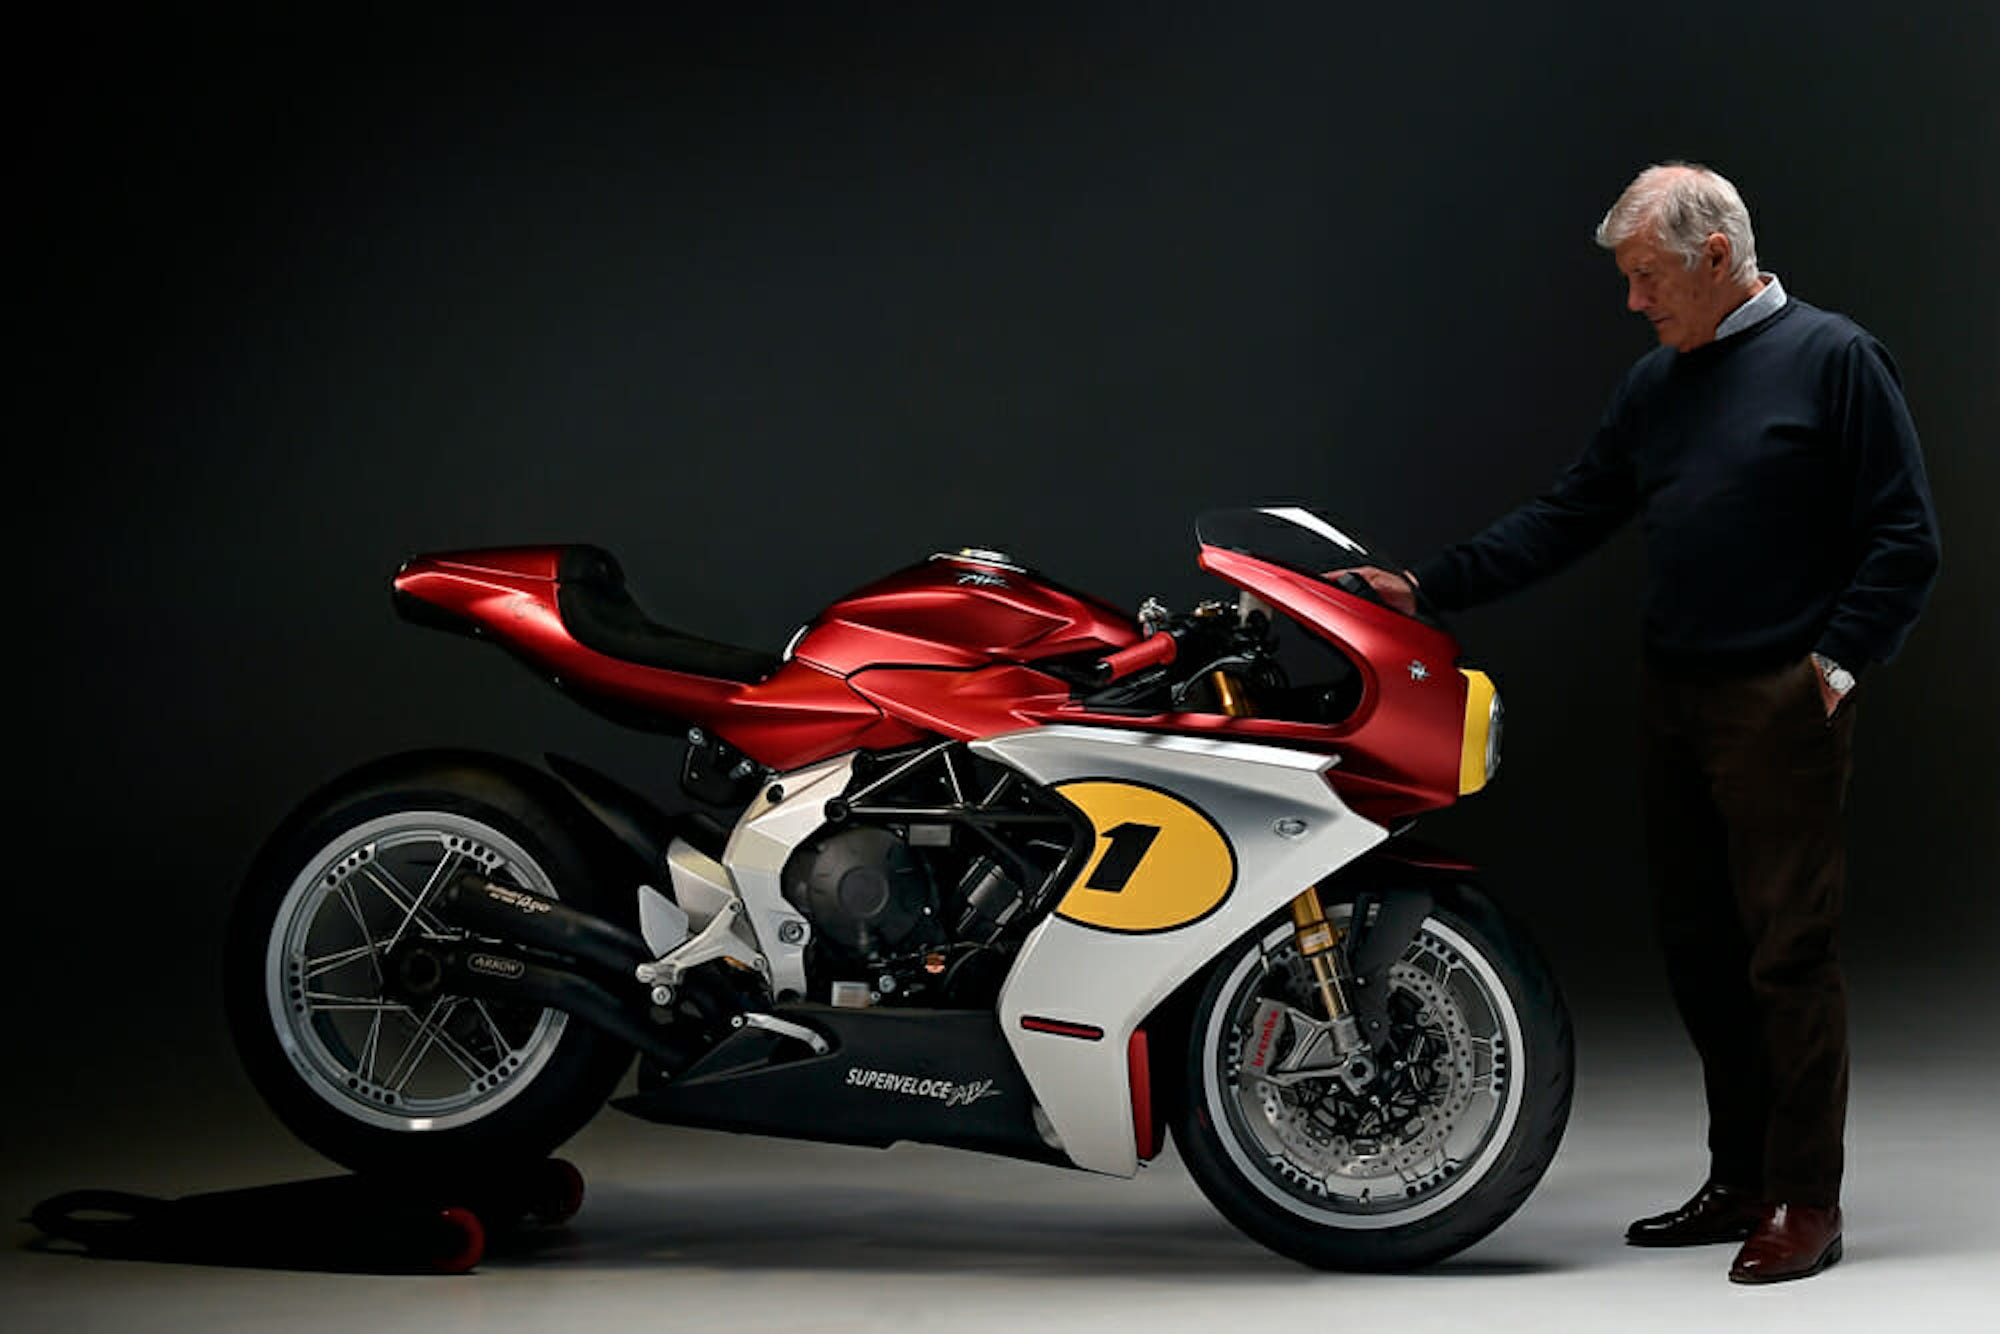 The 2022 MV Agusta 798cc Superveloce Ago Limited Edition. Media sourced from Cycle News.